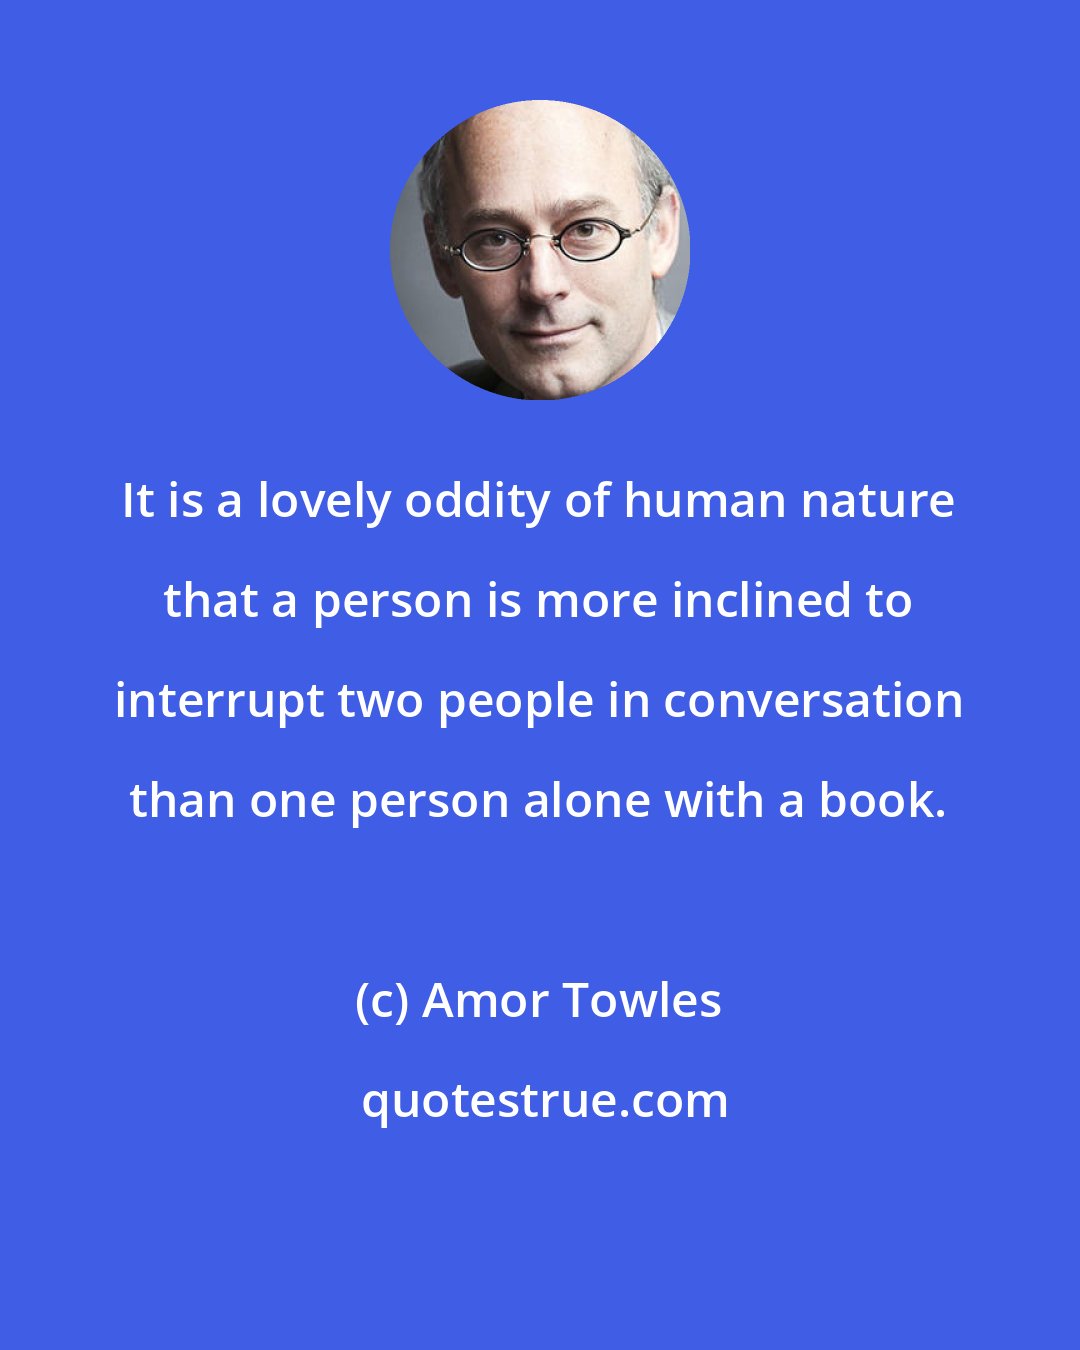 Amor Towles: It is a lovely oddity of human nature that a person is more inclined to interrupt two people in conversation than one person alone with a book.